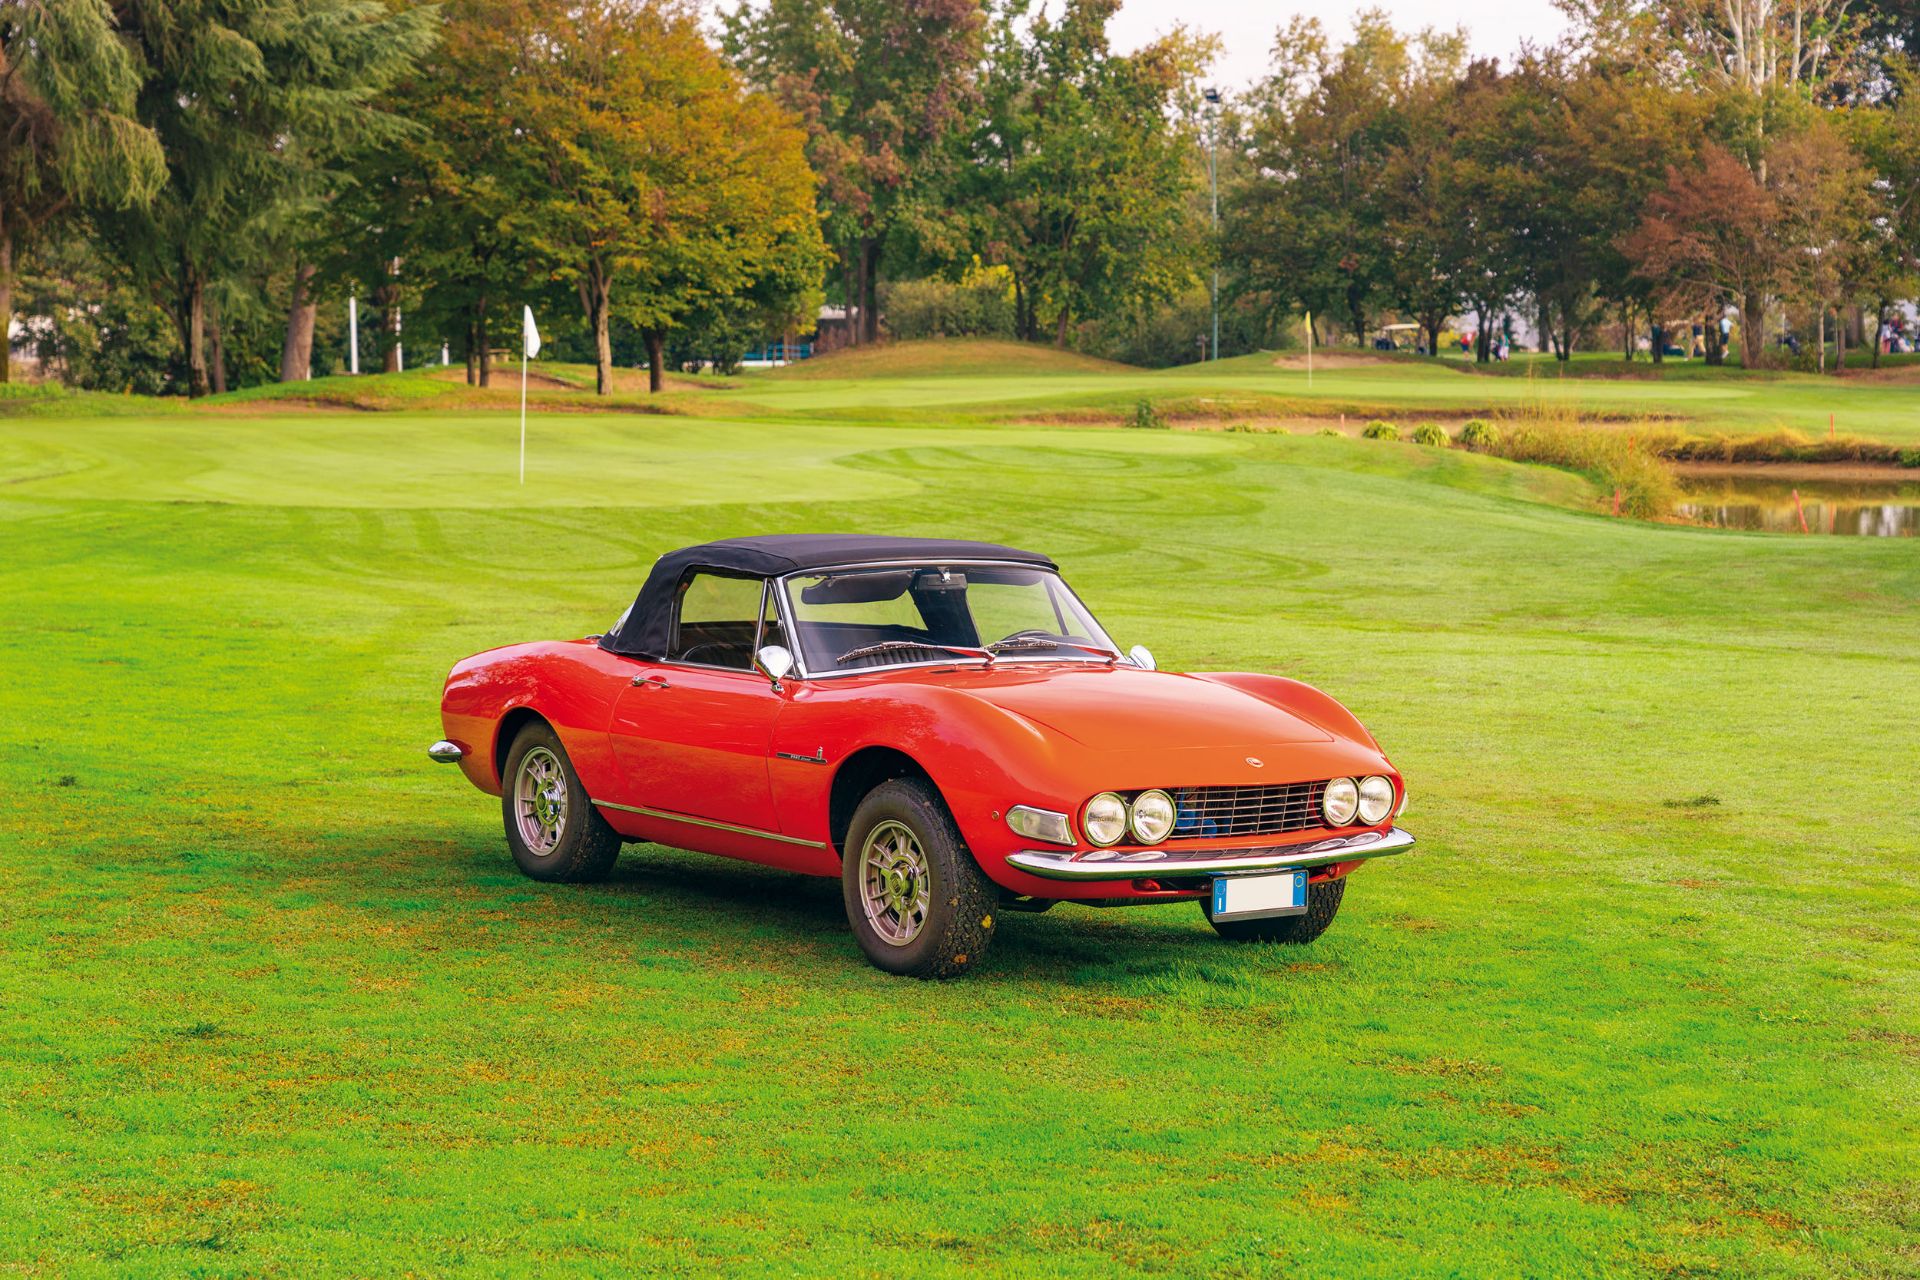 1967 FIAT DINO SPIDER 2000 (TIPO 135 AS) - Image 3 of 6